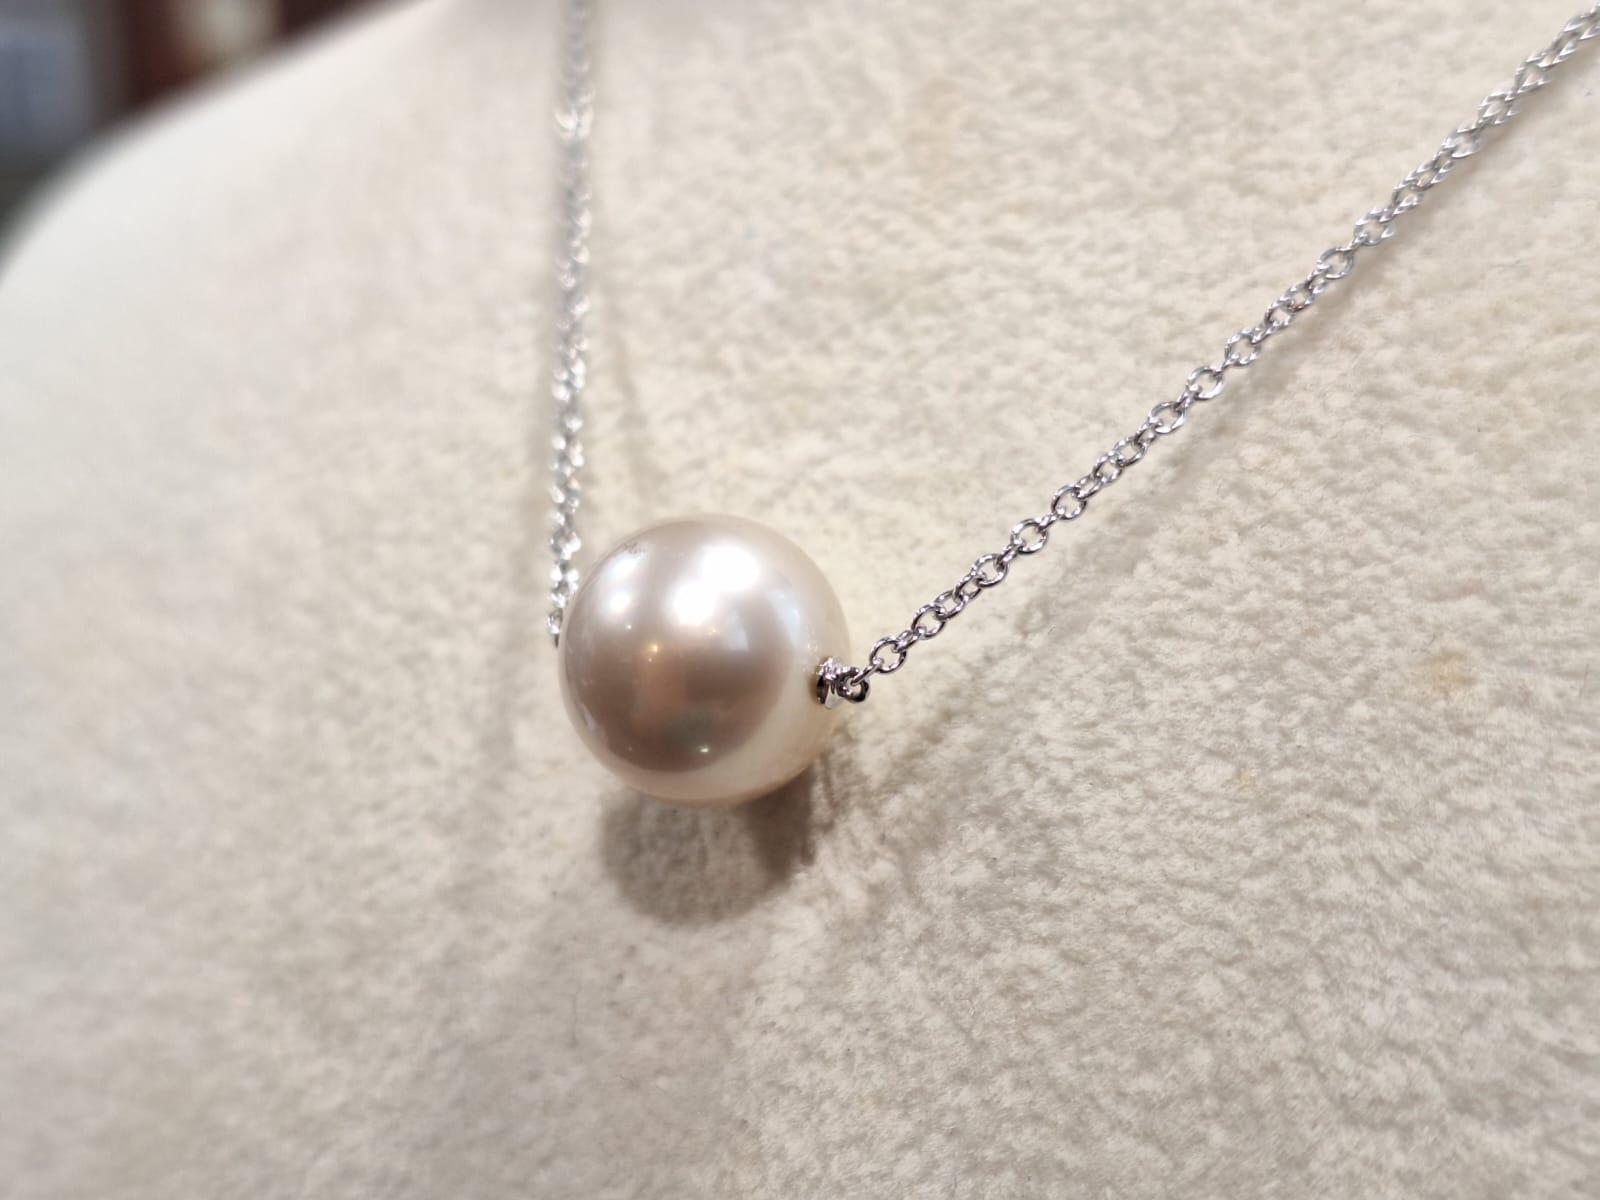 White pearls symbolize innocence, beauty, sincerity, and new beginnings. This is what makes the white pearl a true classic for bridal jewelry.

The south sea pearl the size as 12.75mm.
